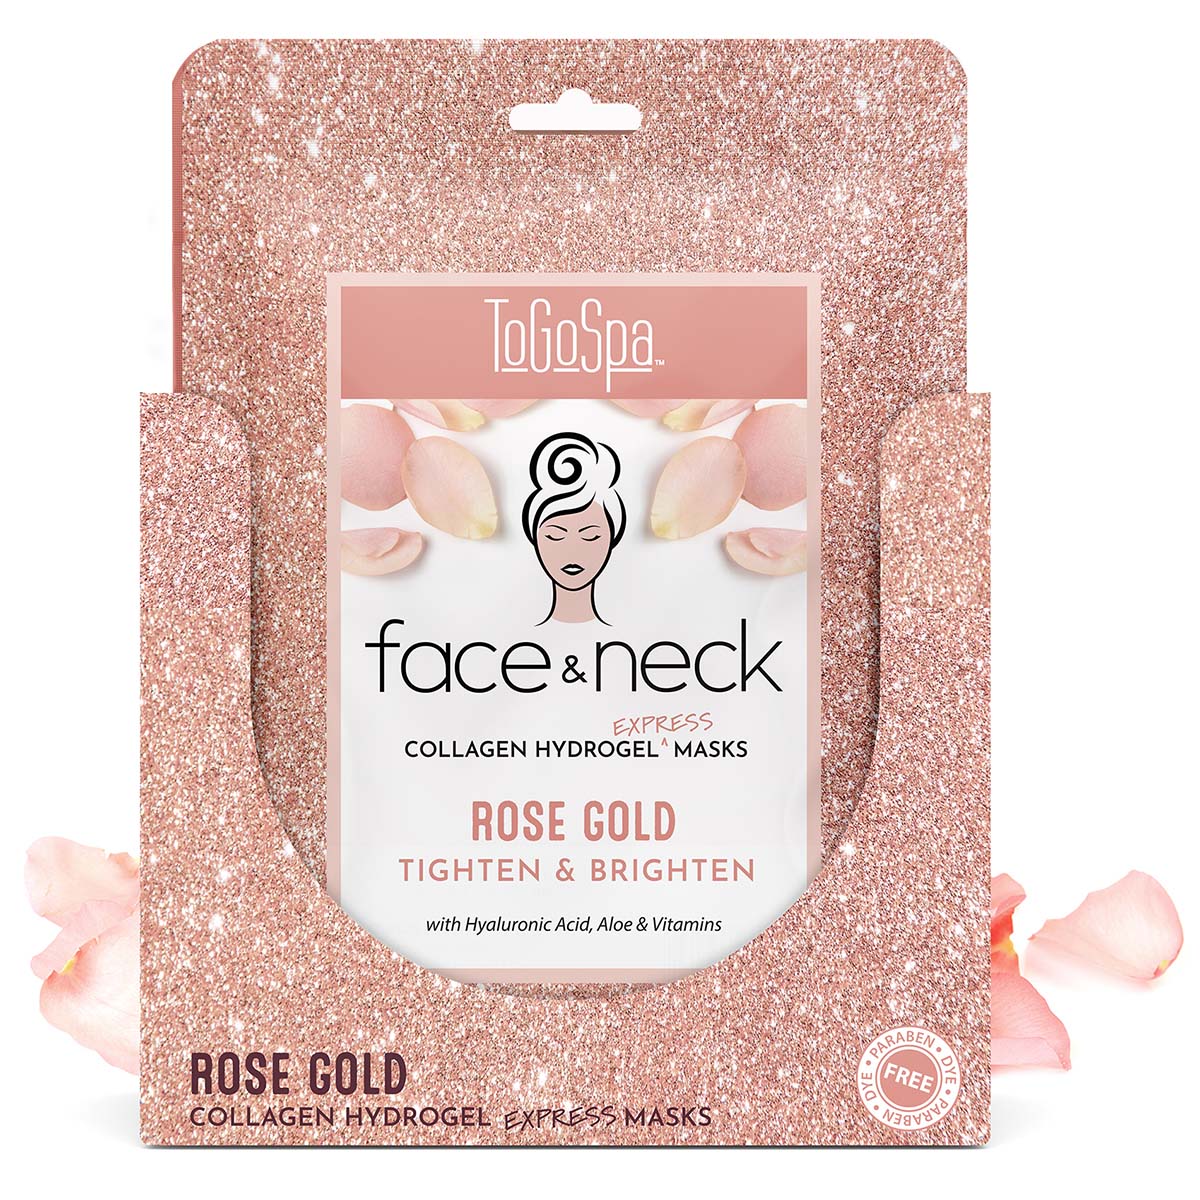 Wholesale Rose Gold Face and Neck EXPRESS Box - 10 packs